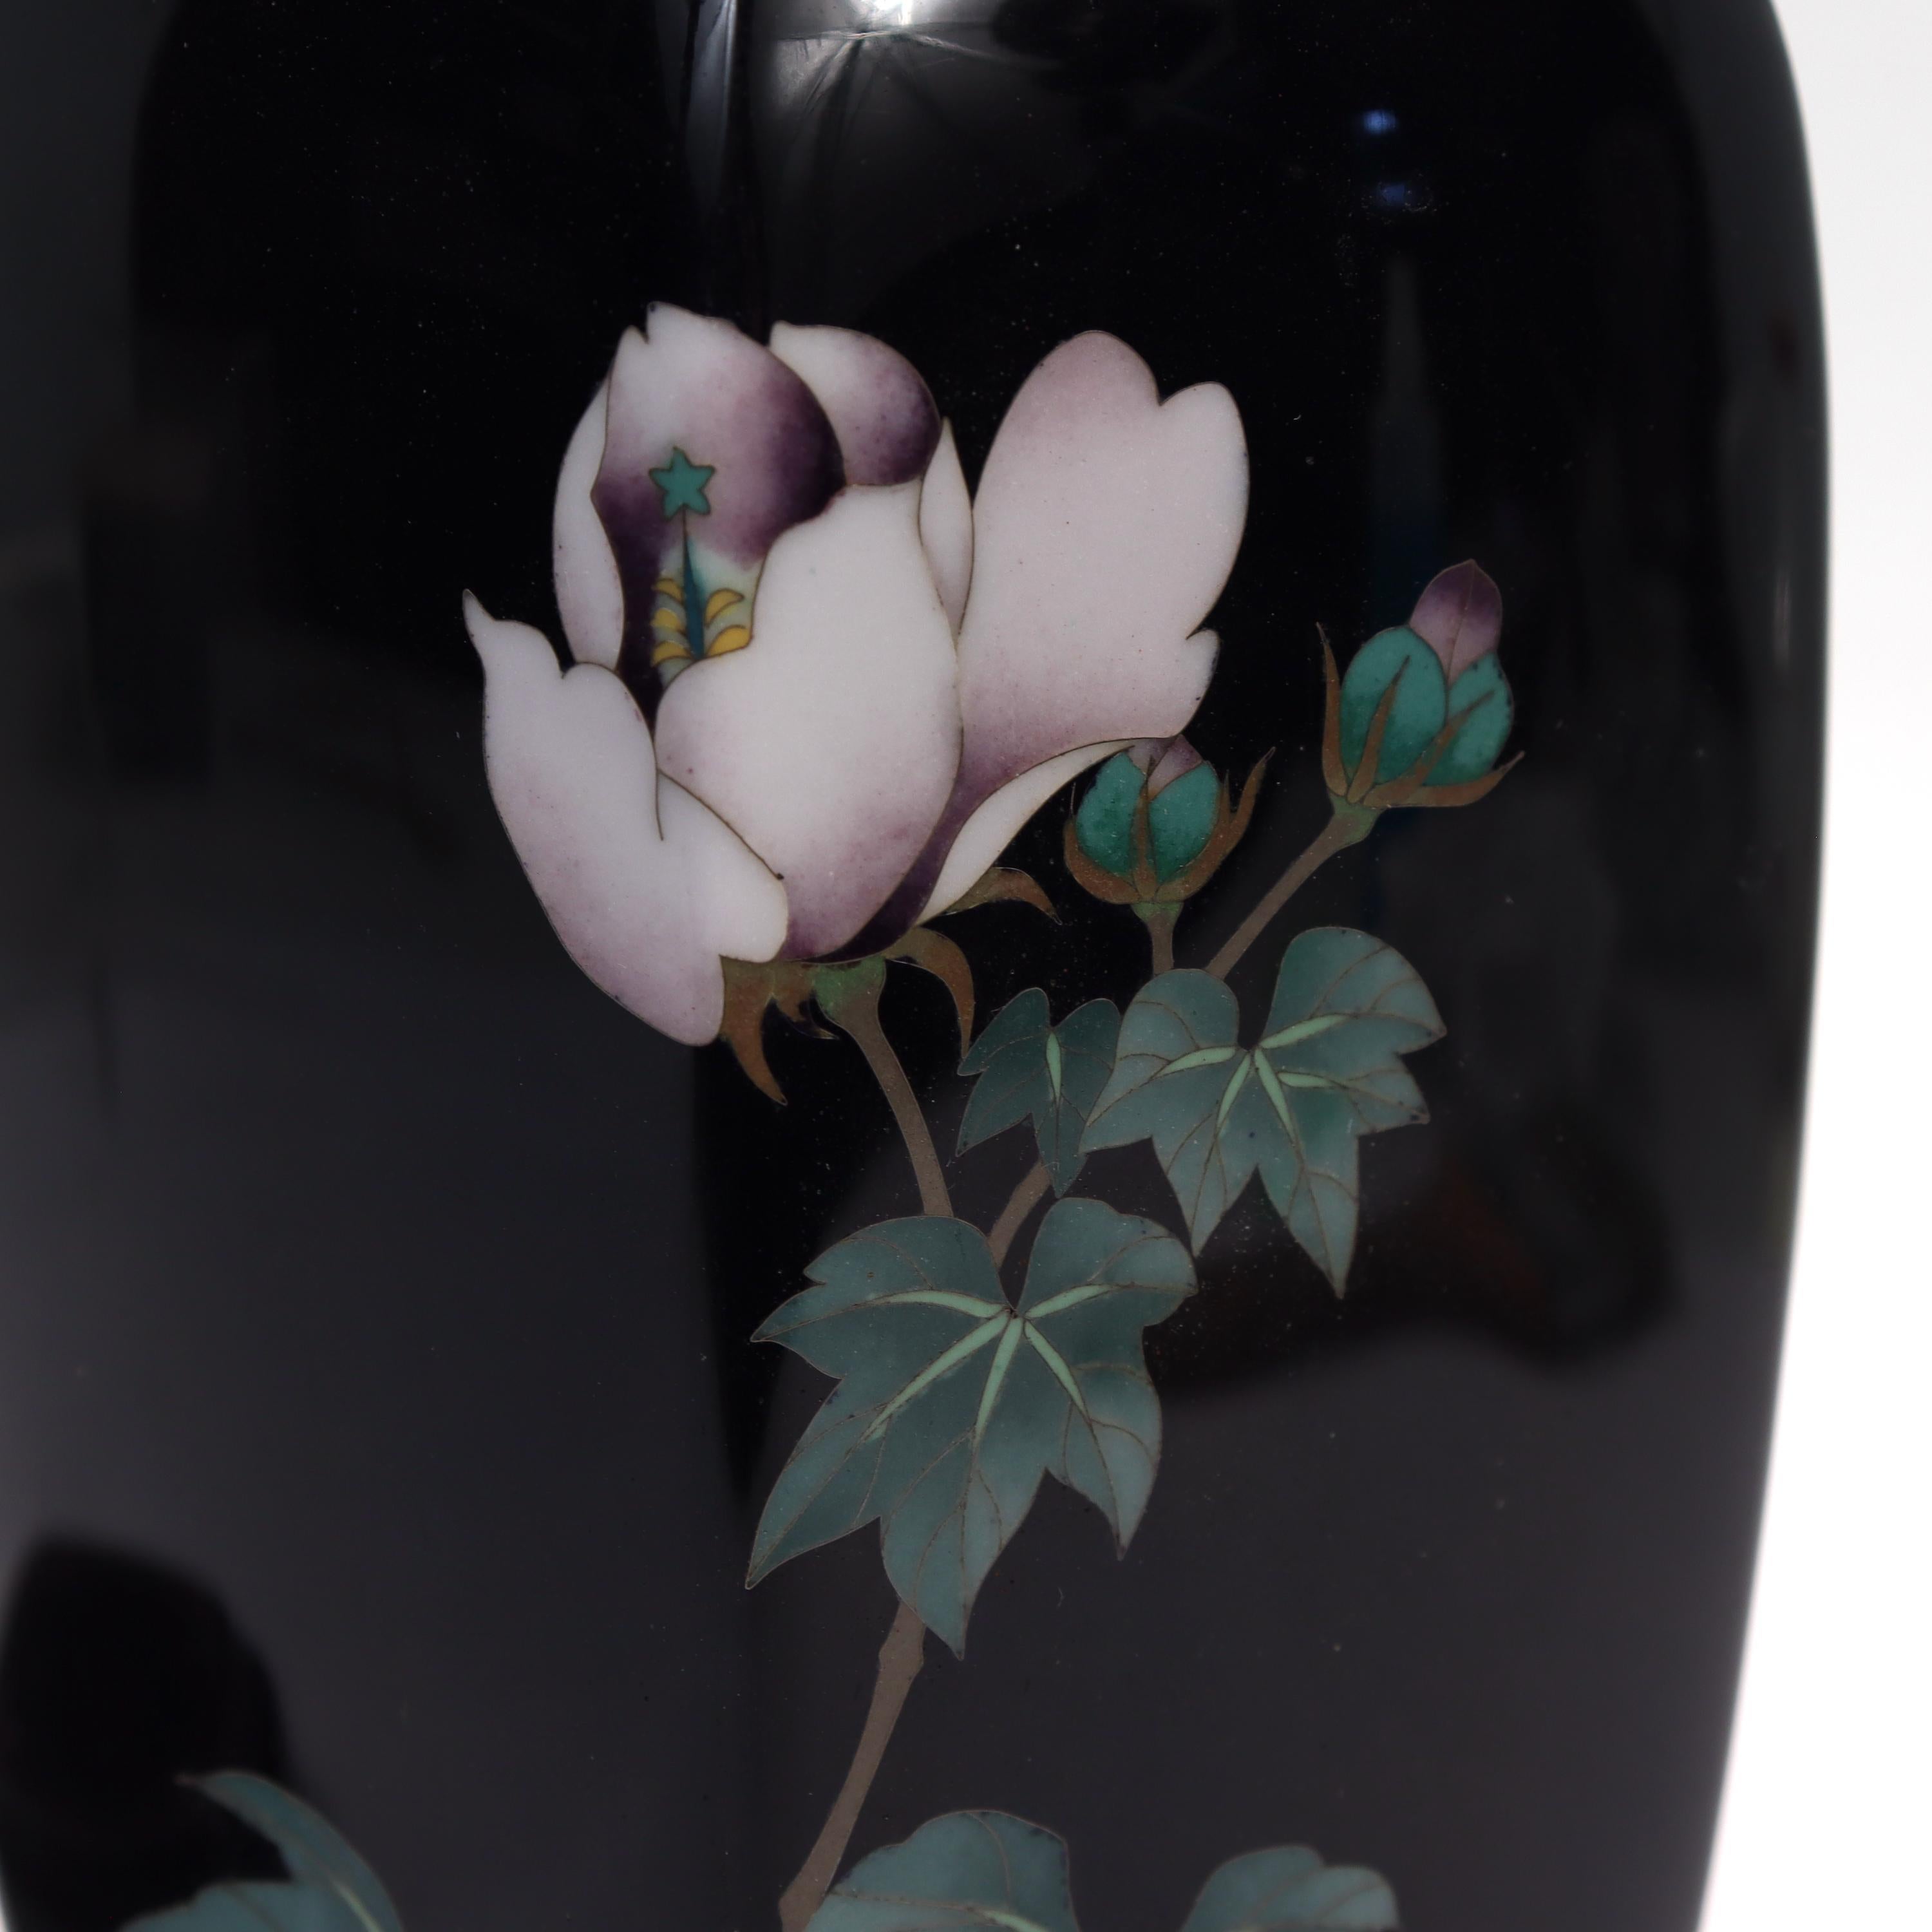 Copper Old or Antique Japanese Wired Cloisonne Enamel Vase with White Flowers